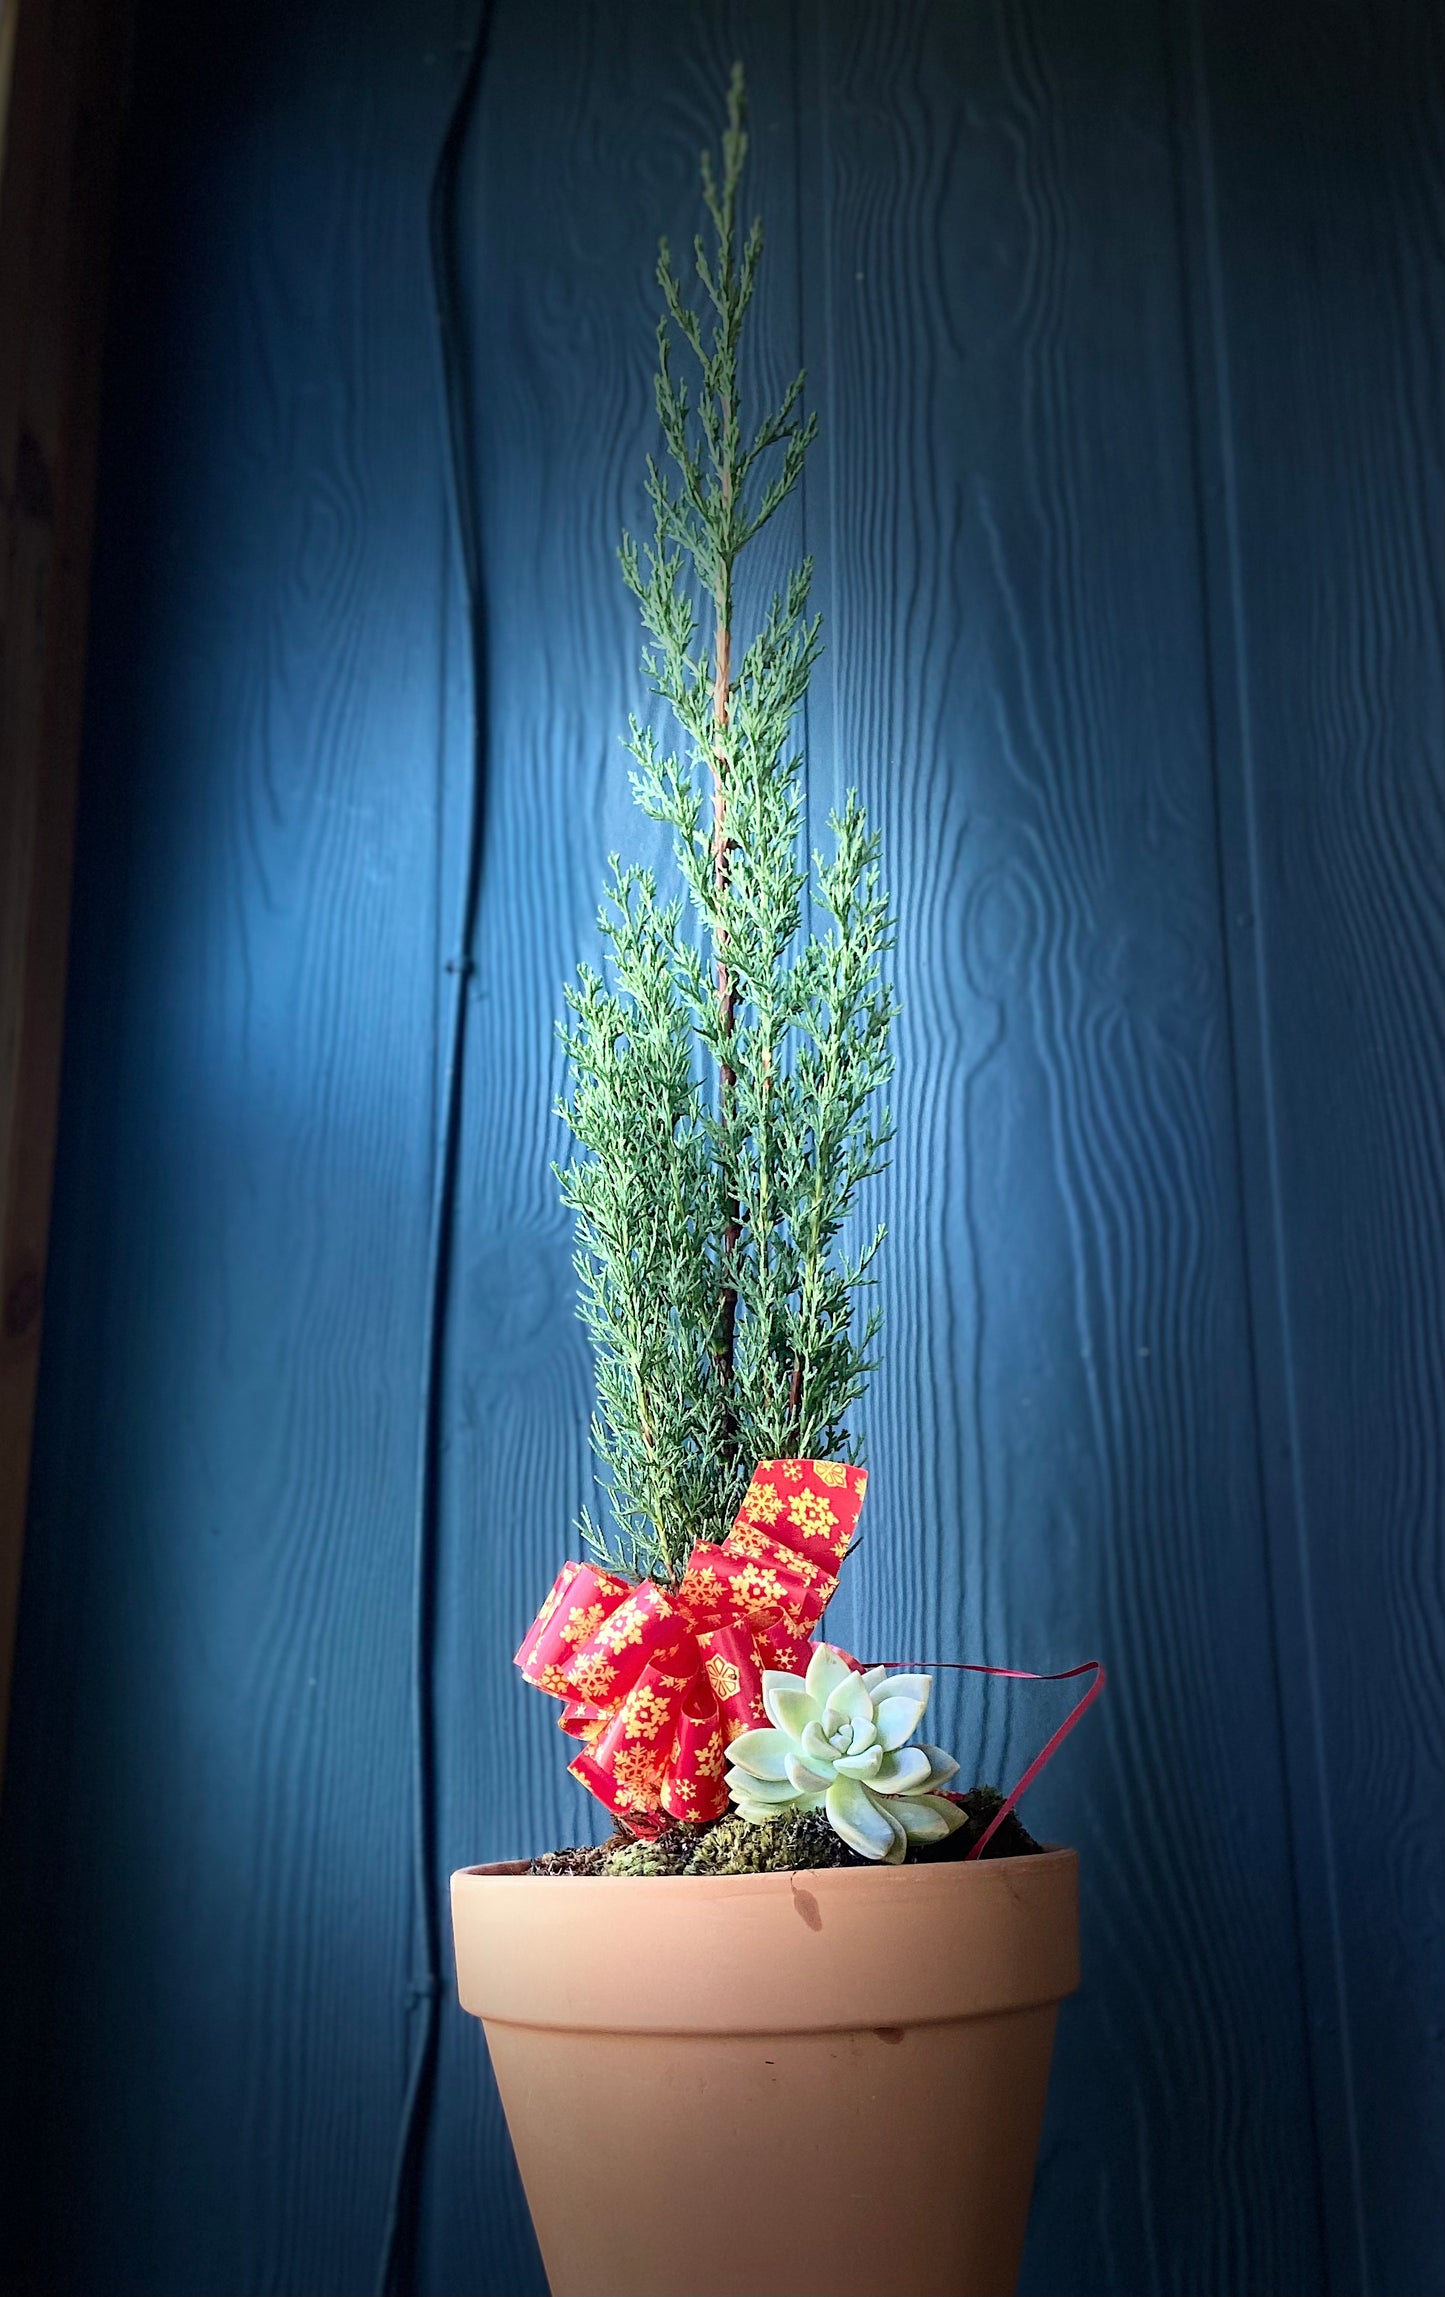 Merry Maui Christmas Scented Cypress